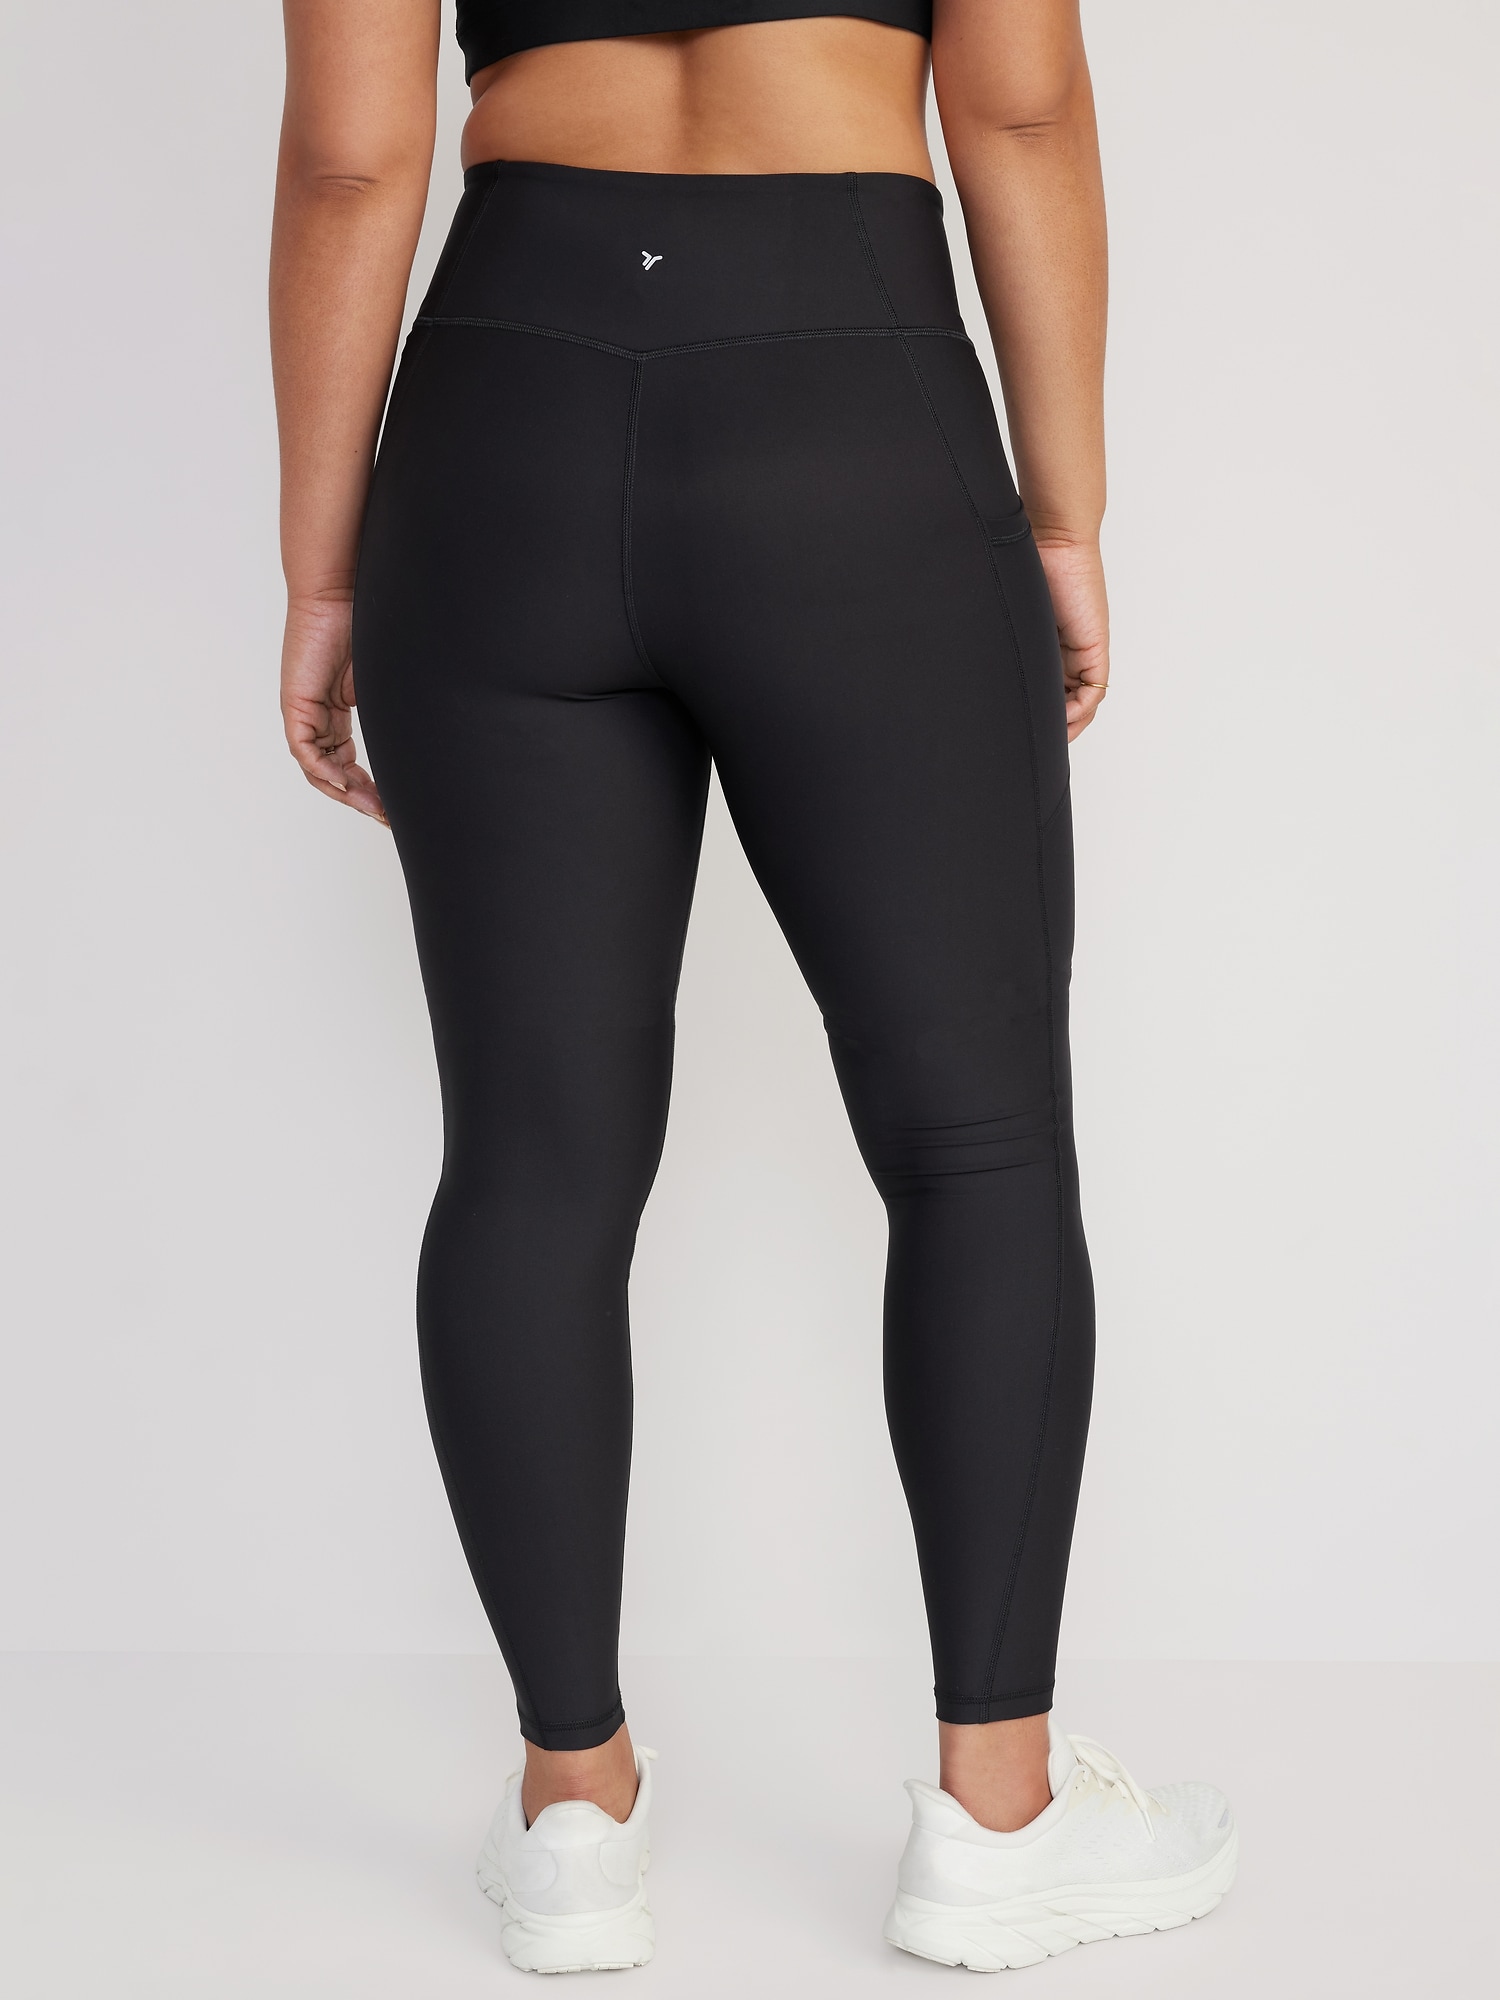 Best High-Waisted Leggings at Old Navy 2021